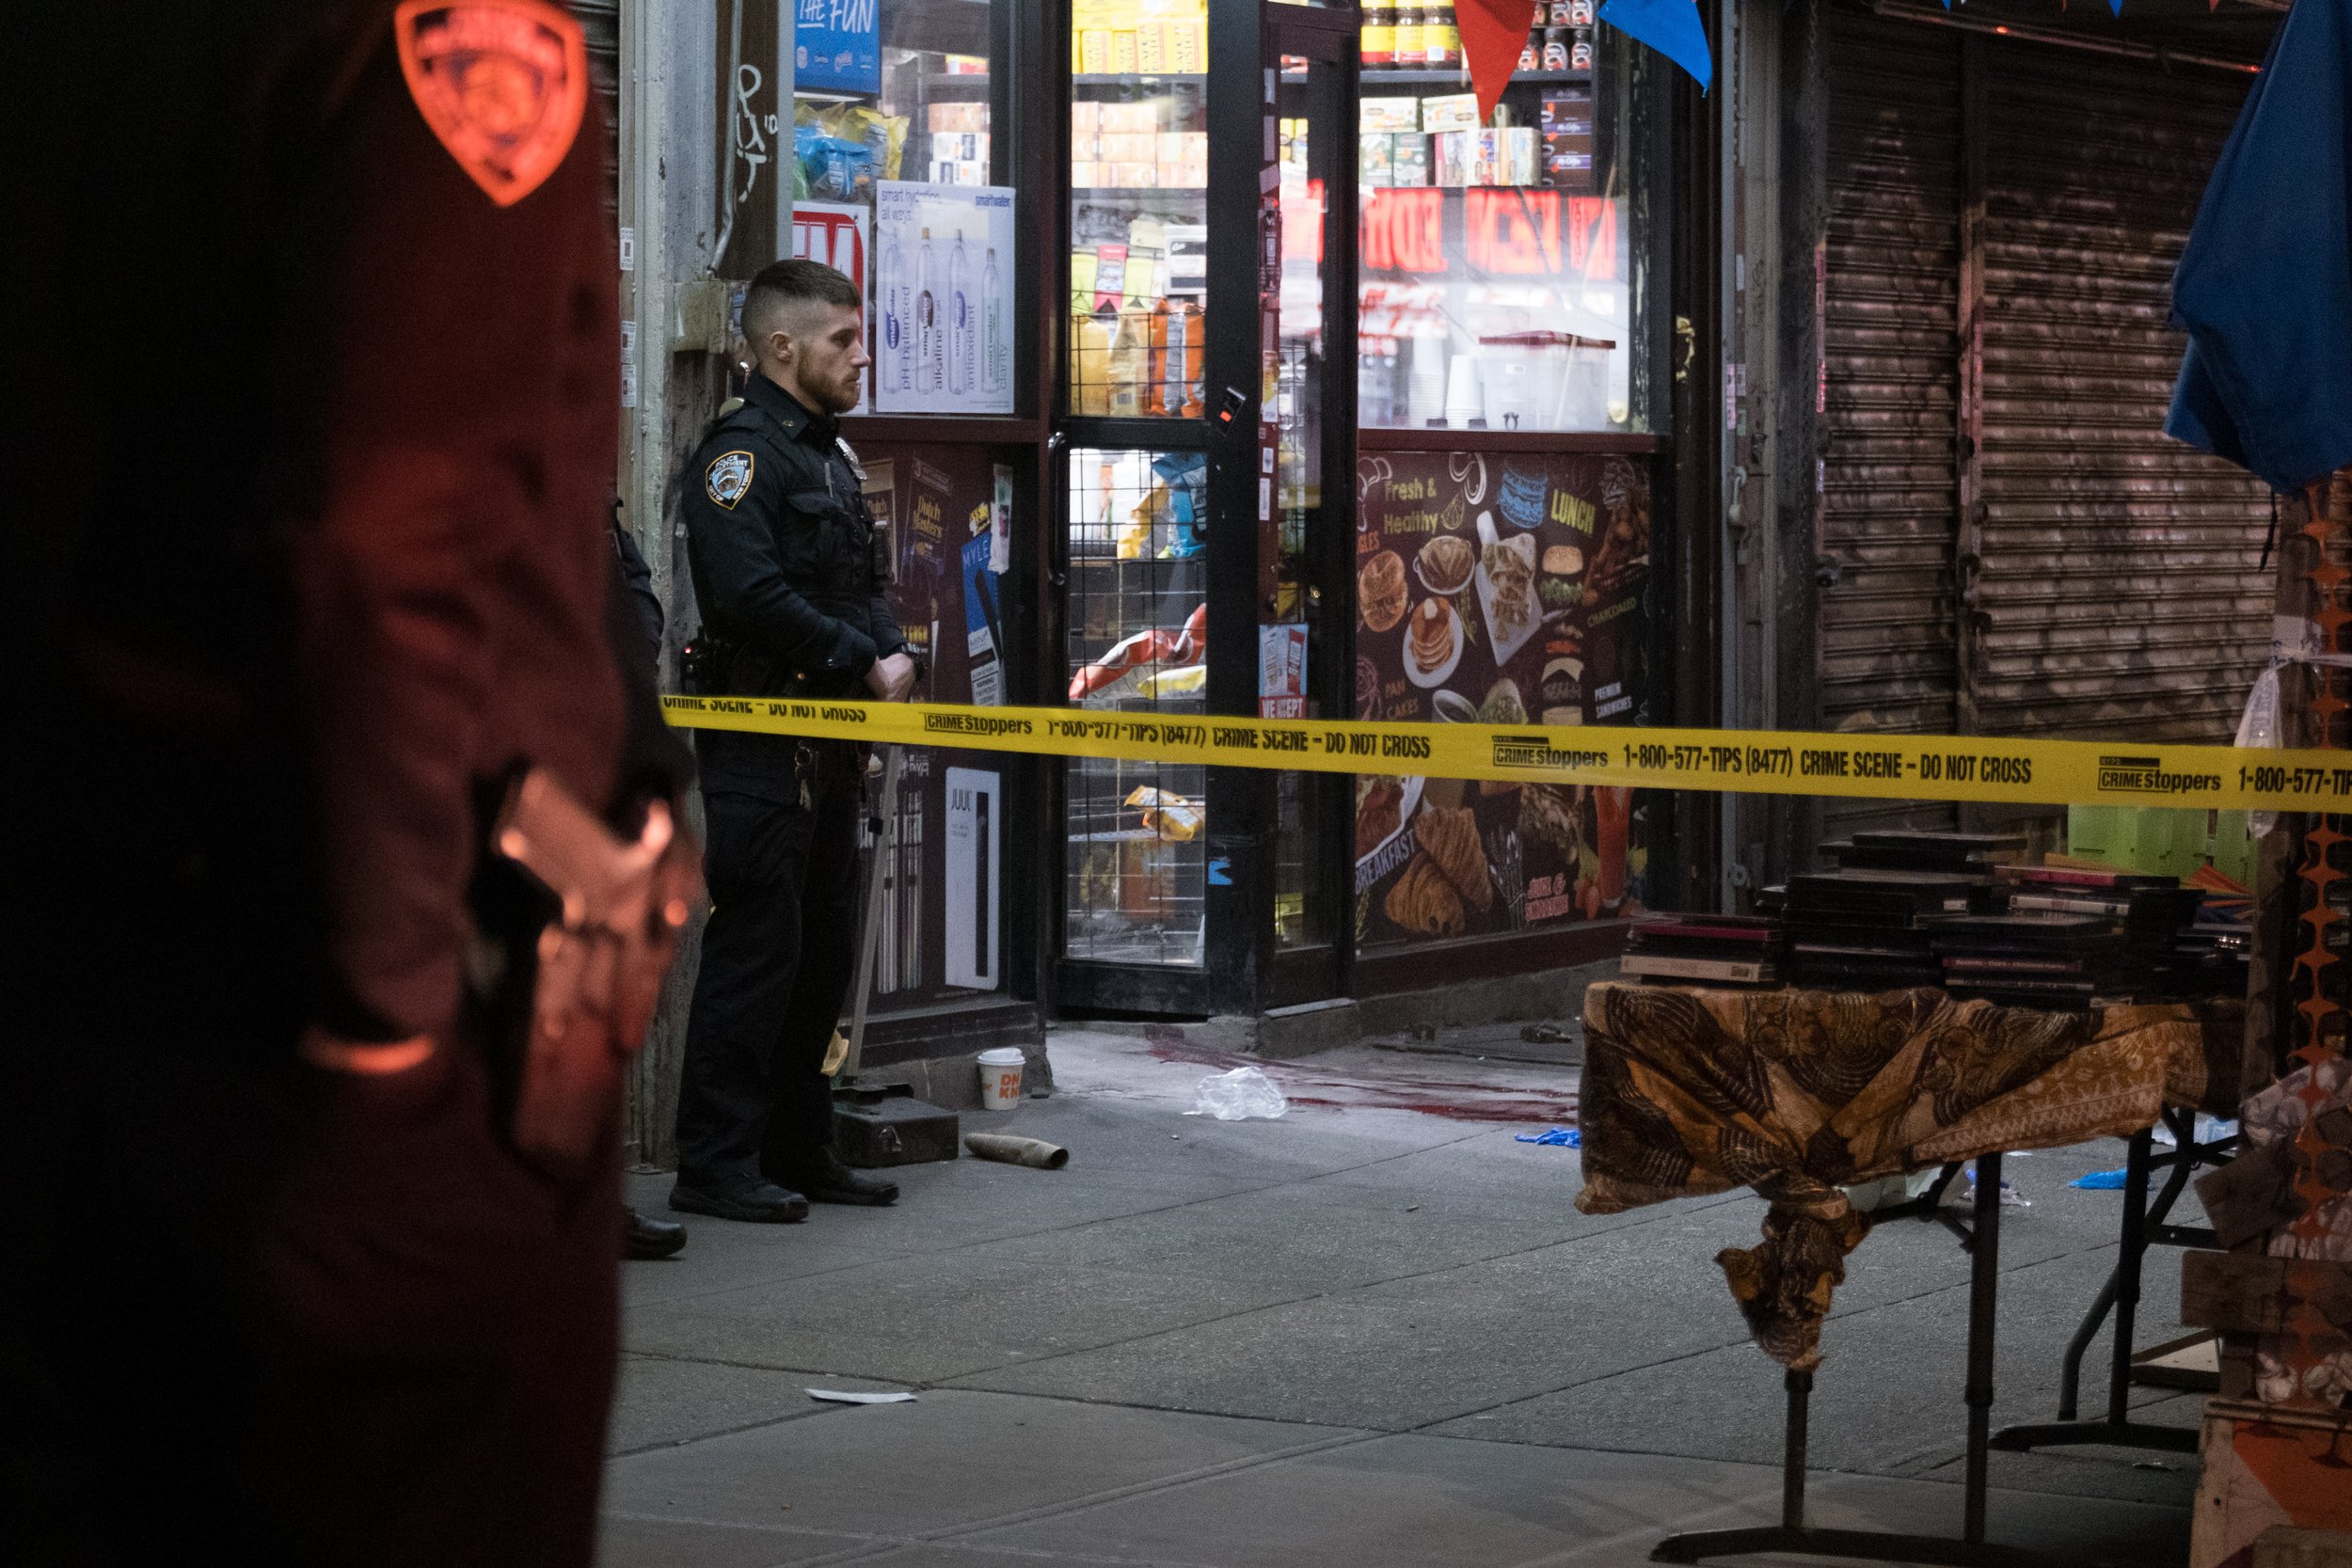  April 5th, 2022 - Bronx, NY: At approximately 7 p.m., officers arriving to the area of 374 E. 188th St. found 61-year-old Soriano De-Perdomo, mother of two, mortally wounded and bleeding heavily on the ground after taking a gunshot to her back when 